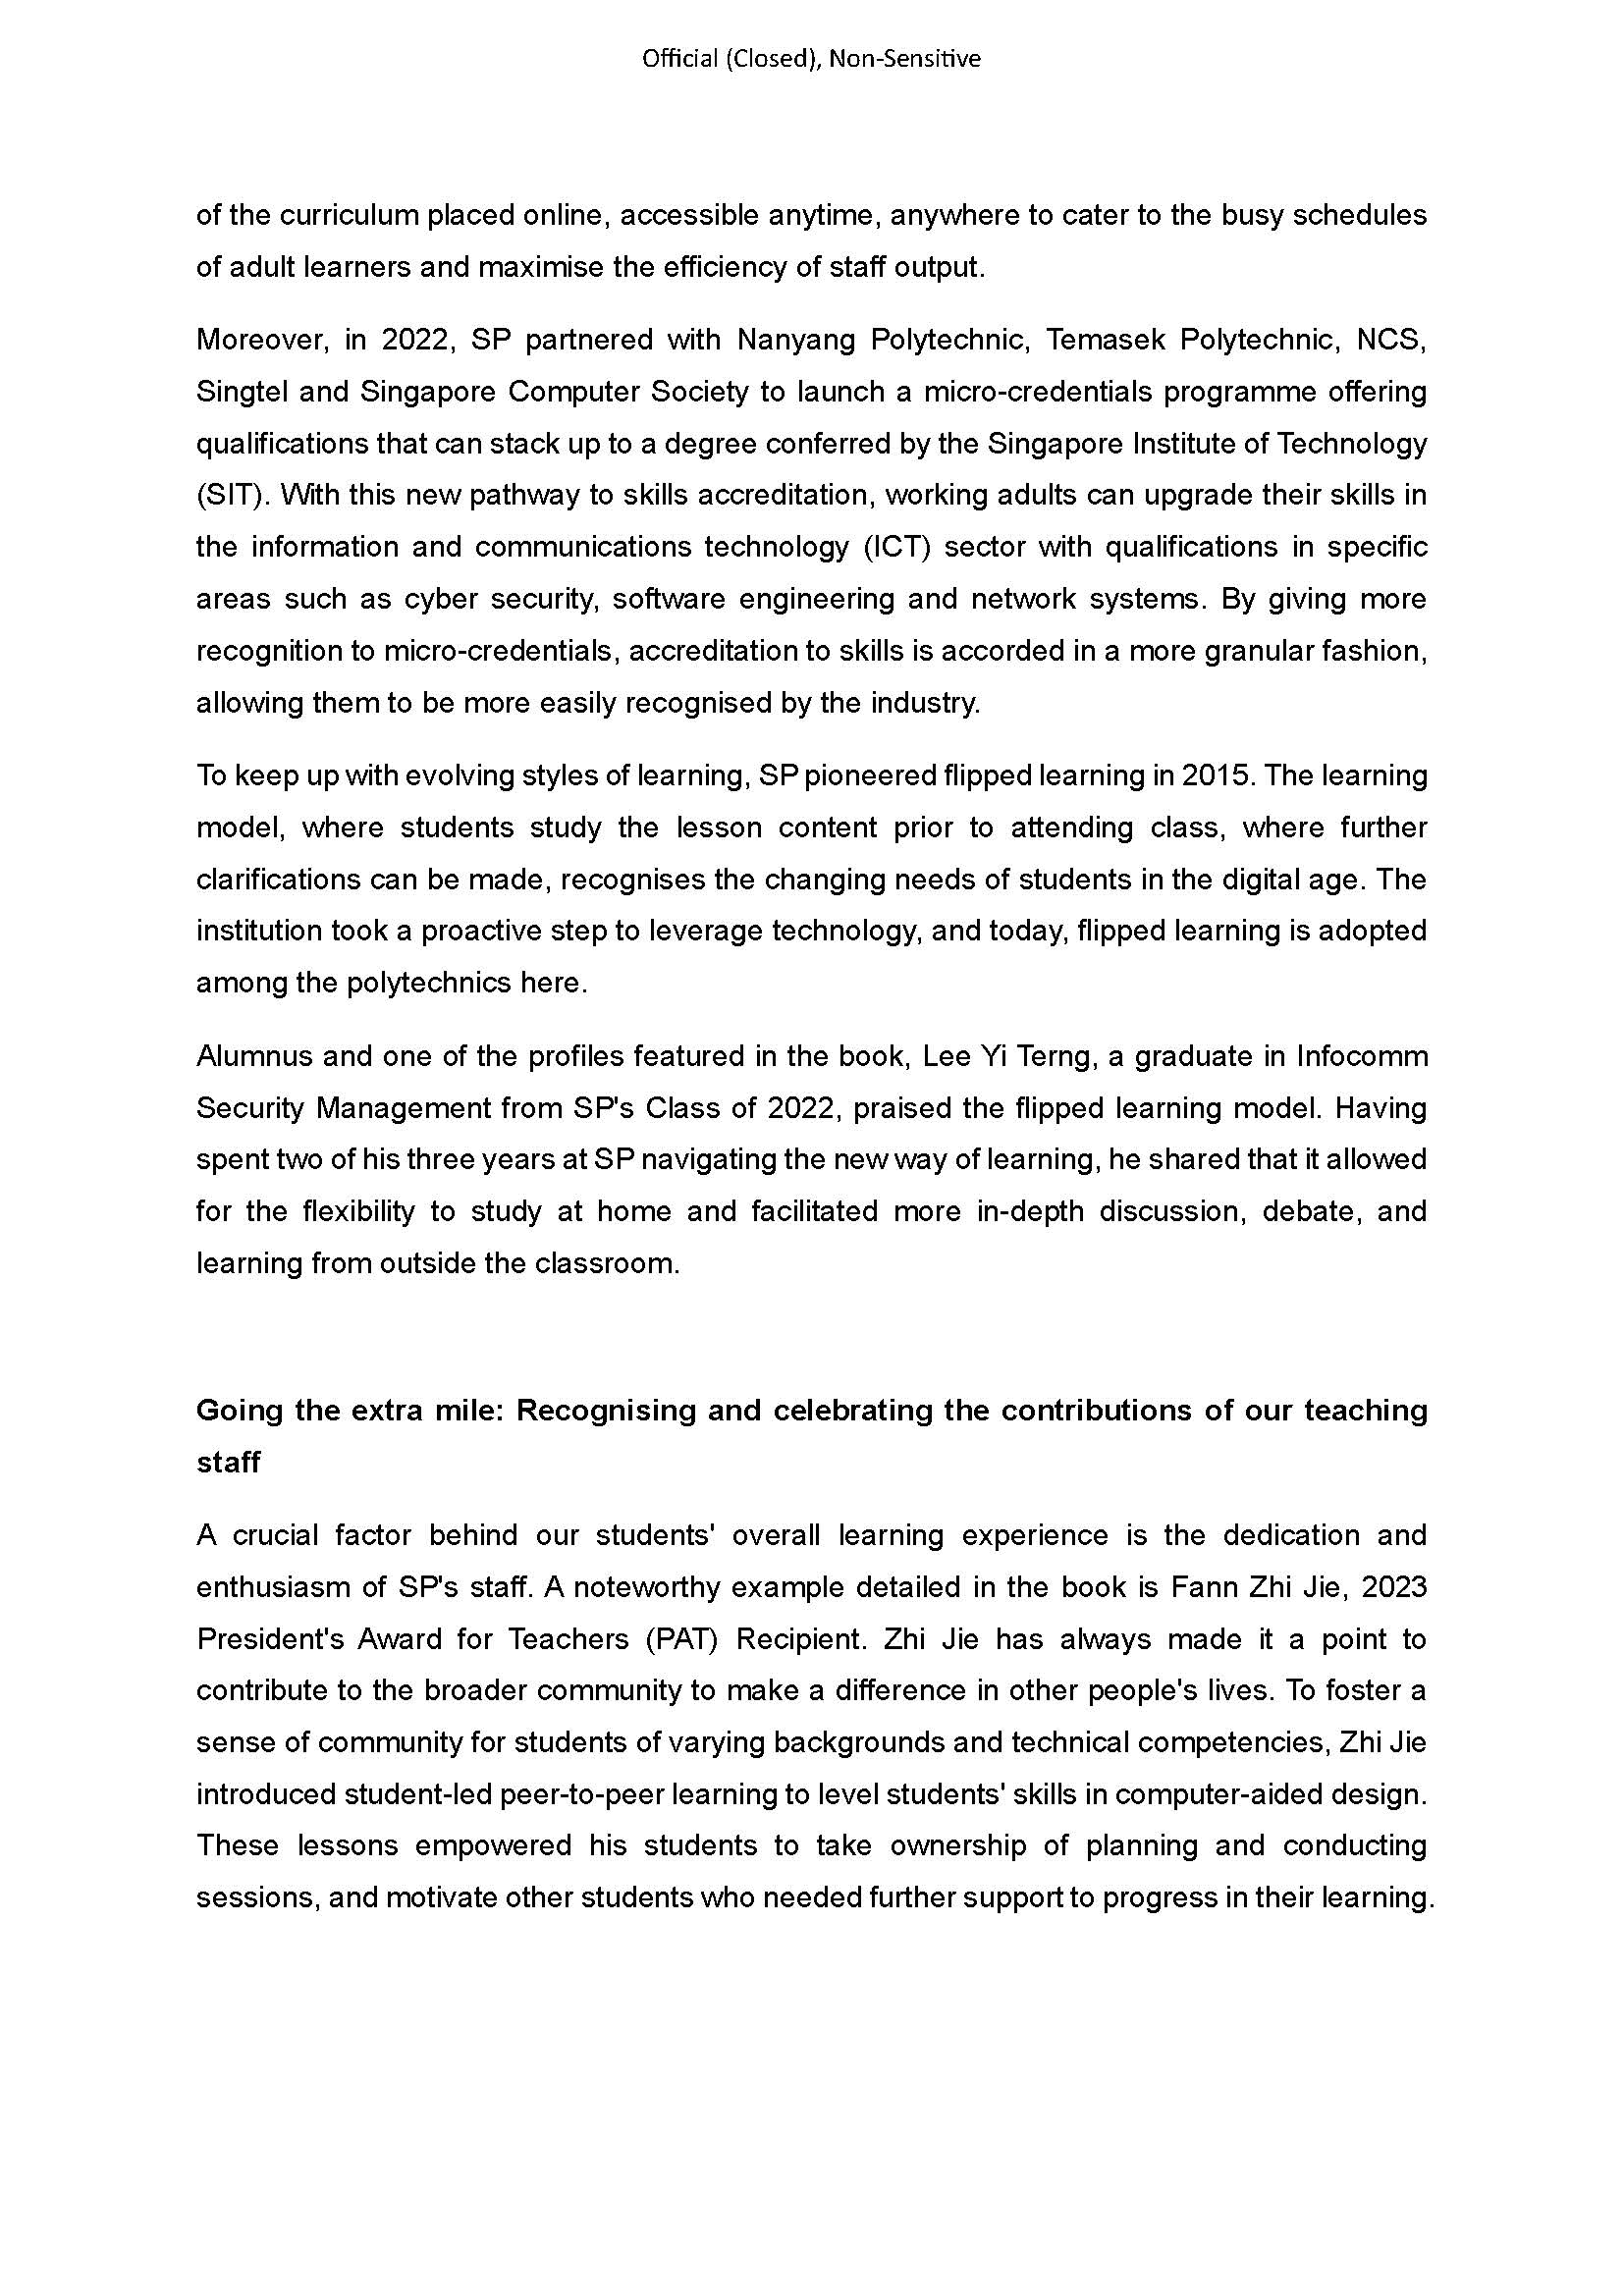 Draft SP70 media release_311023_Final_Page_2